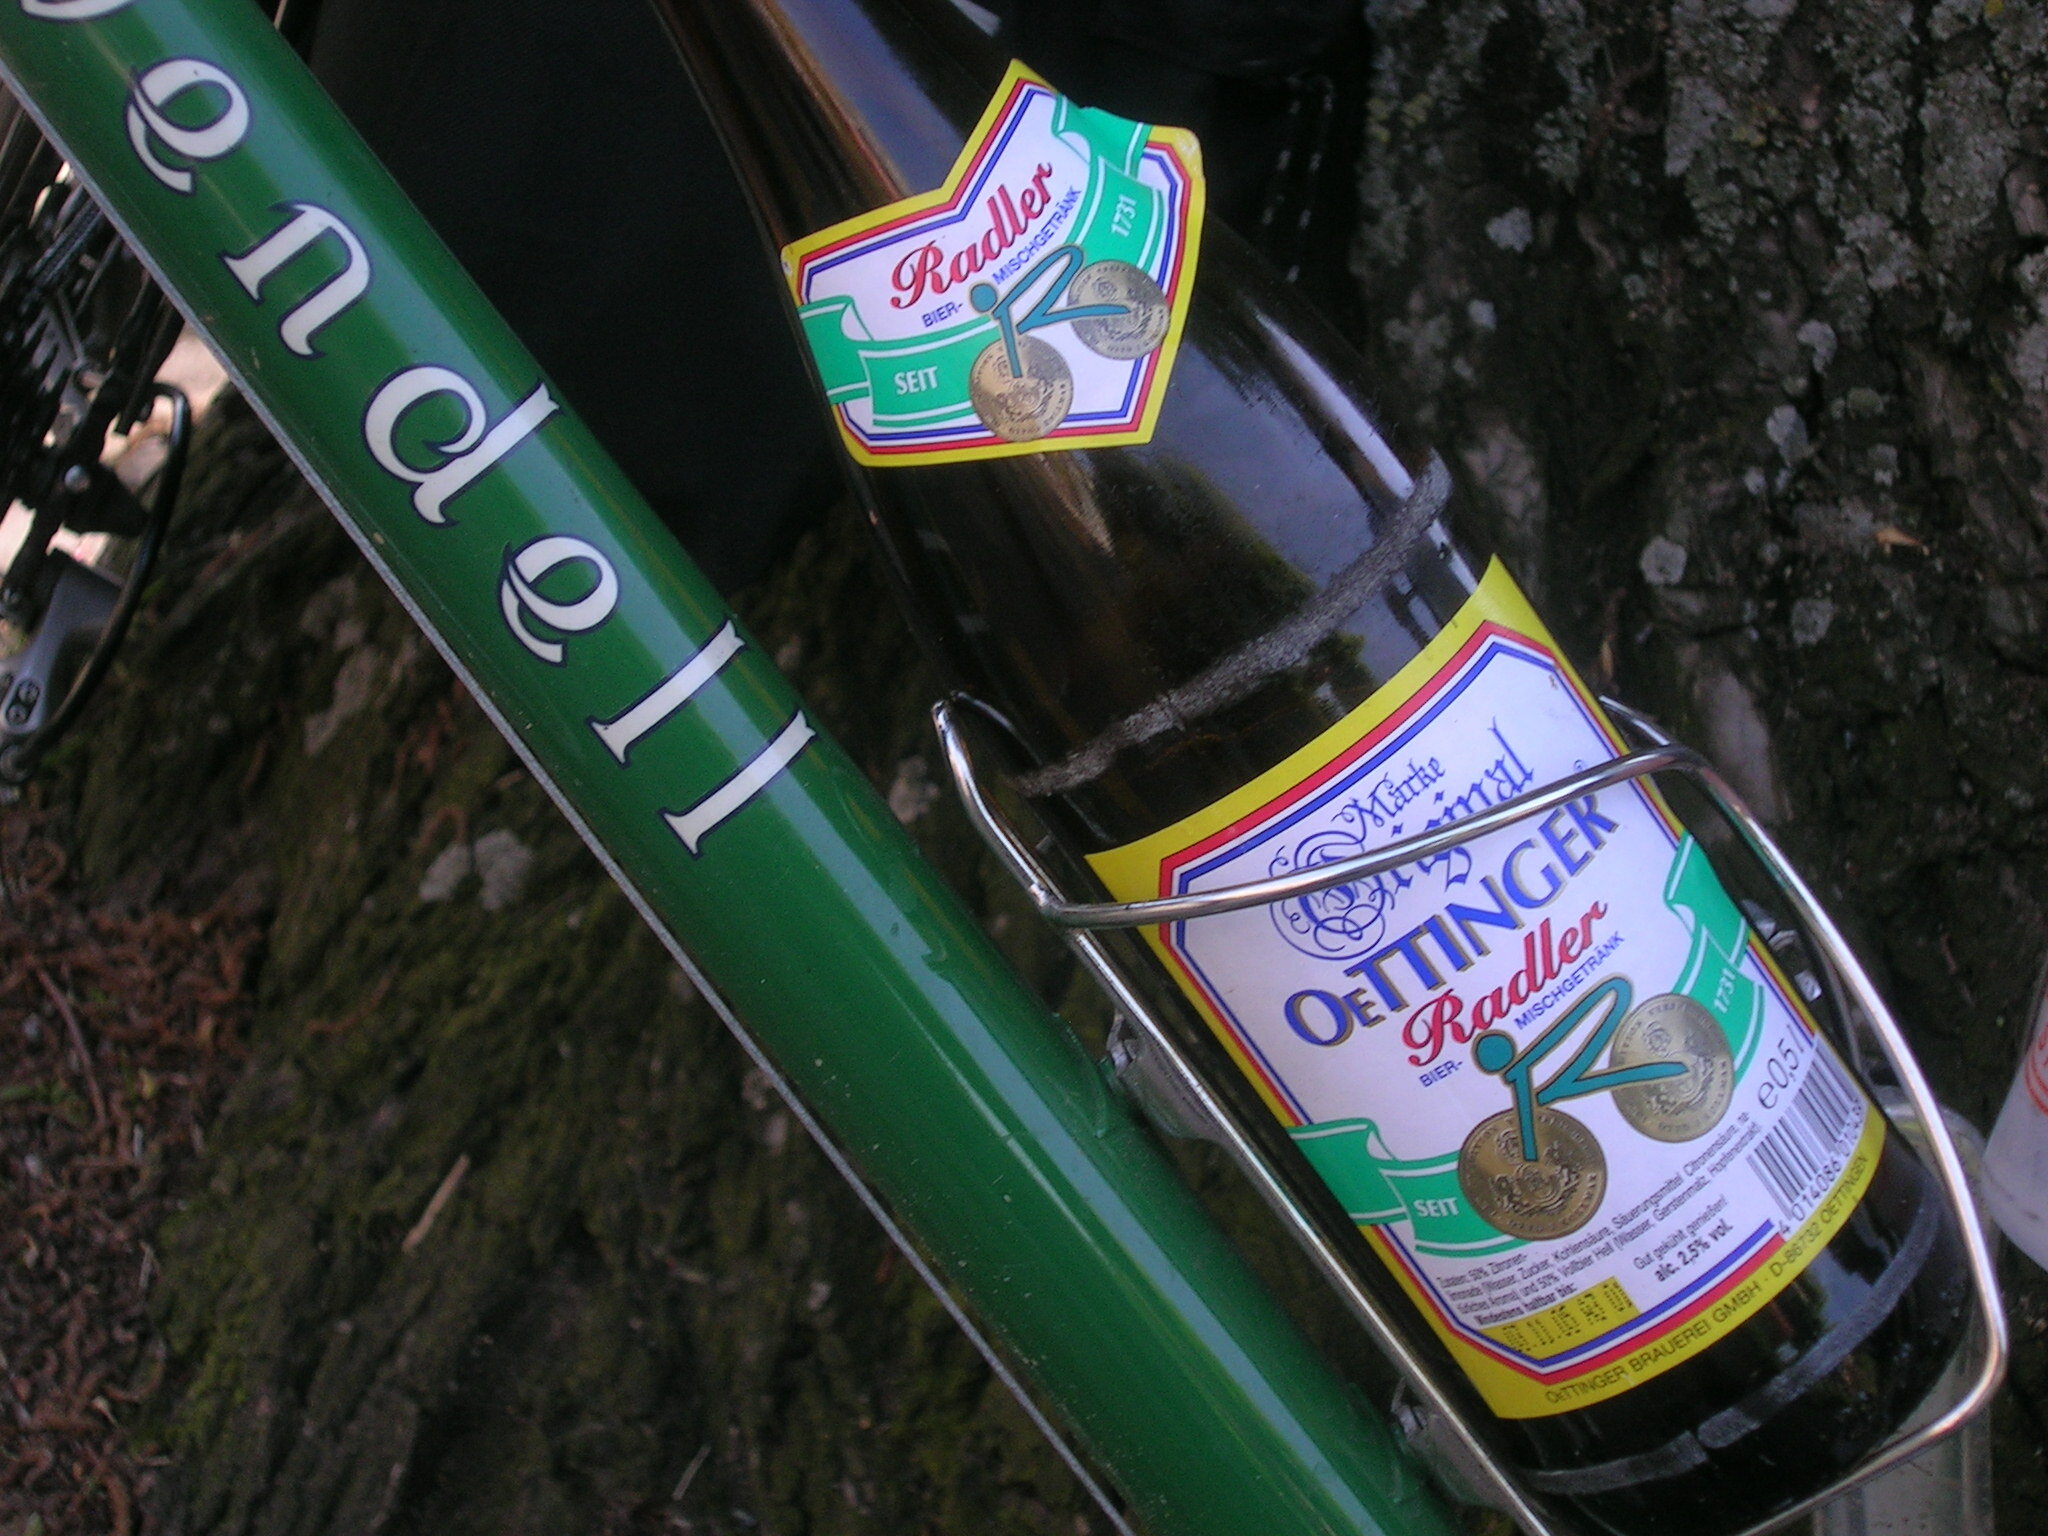  In German, “ radler ” translates to “cyclist.” The term Radler originated with a drink called Radlermass (literally “cyclist liter”) that was created by Innkeeper Franz Kugler in a small town named Deisenhofen, just outside Munich. During the great 